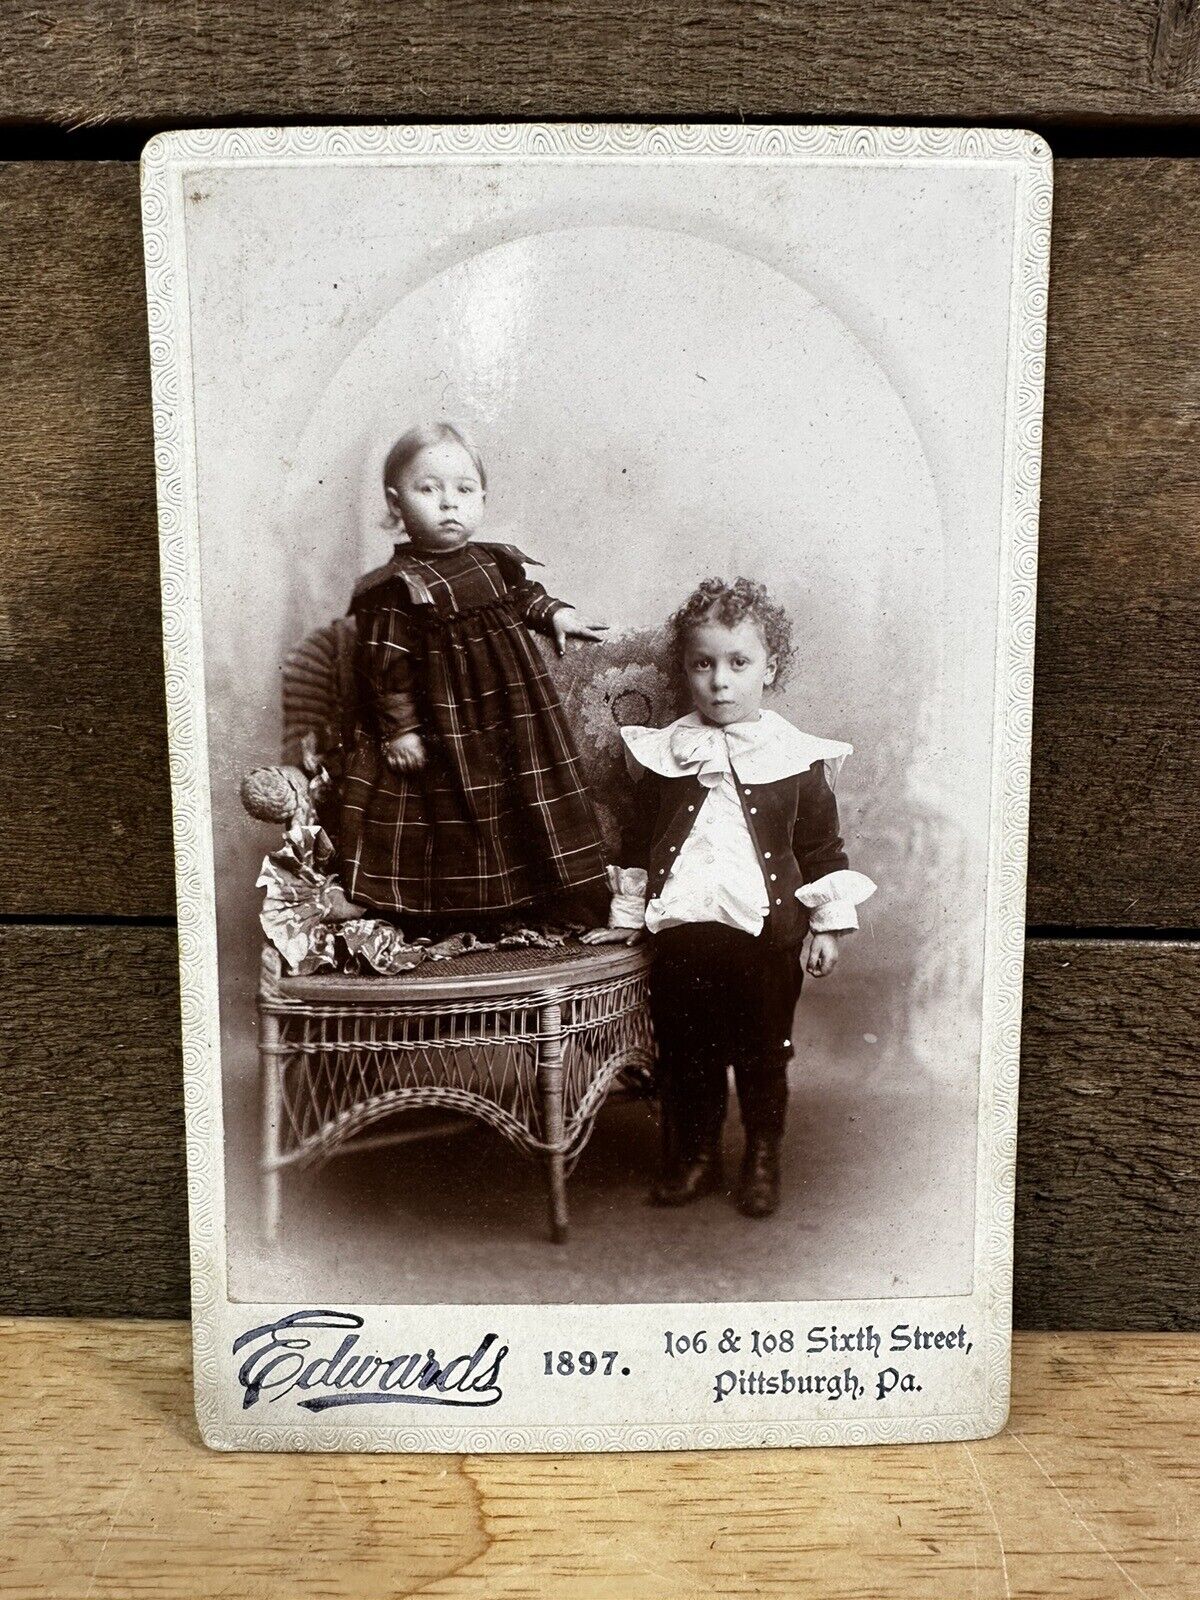 Antique Edwards 1897 Cabinet Card “Two Children”  Pittsburgh